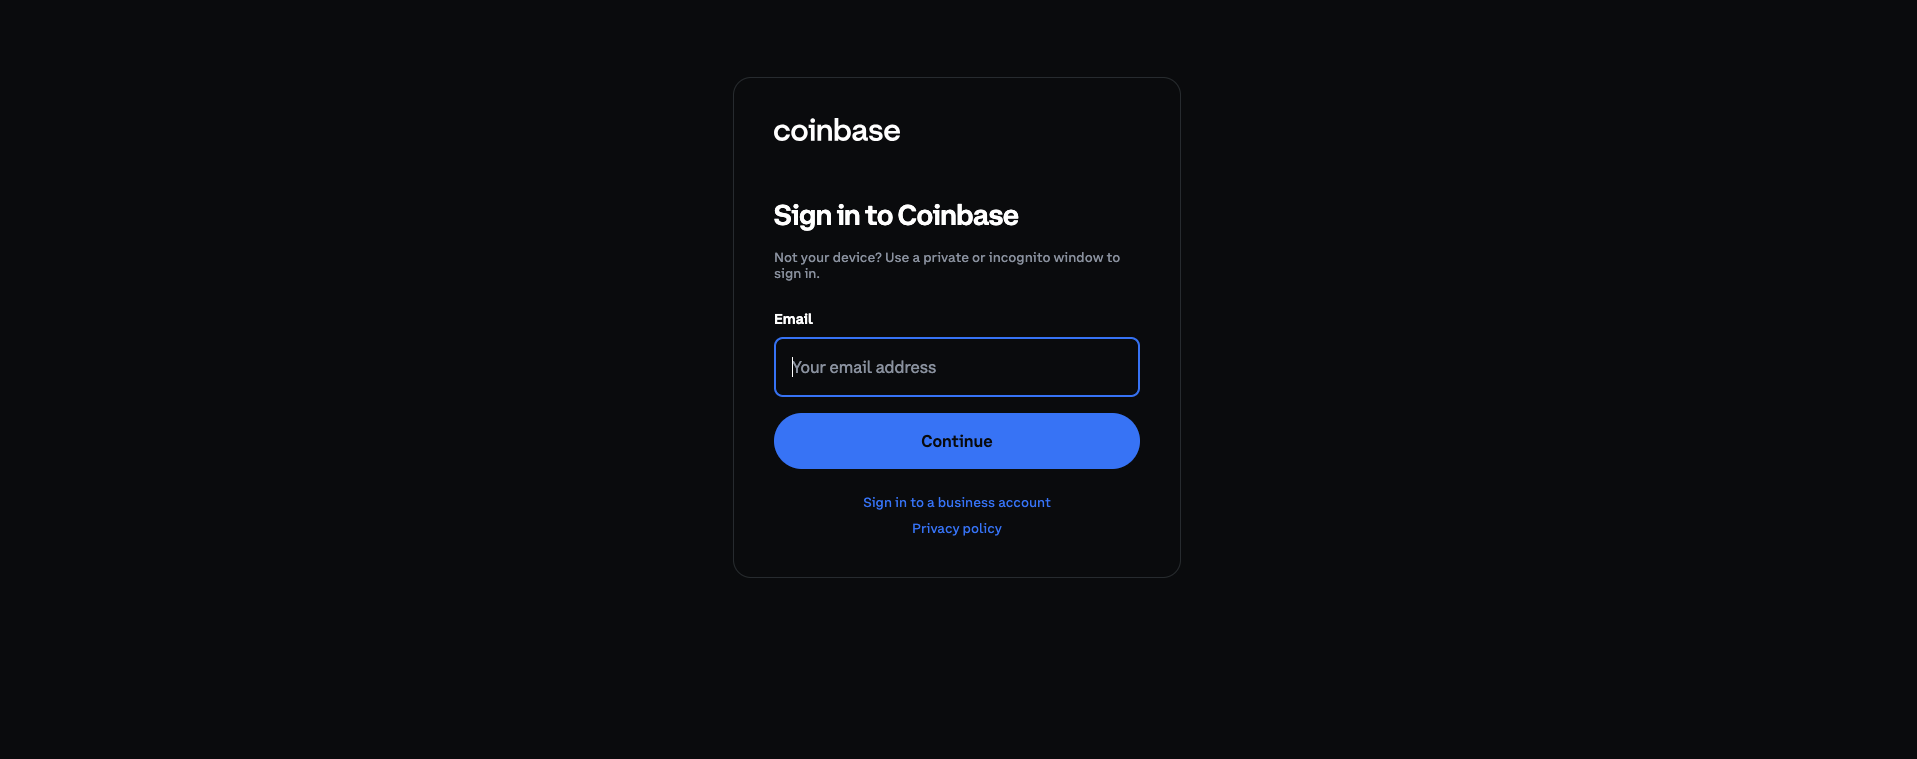 Coinbase Sign in Page